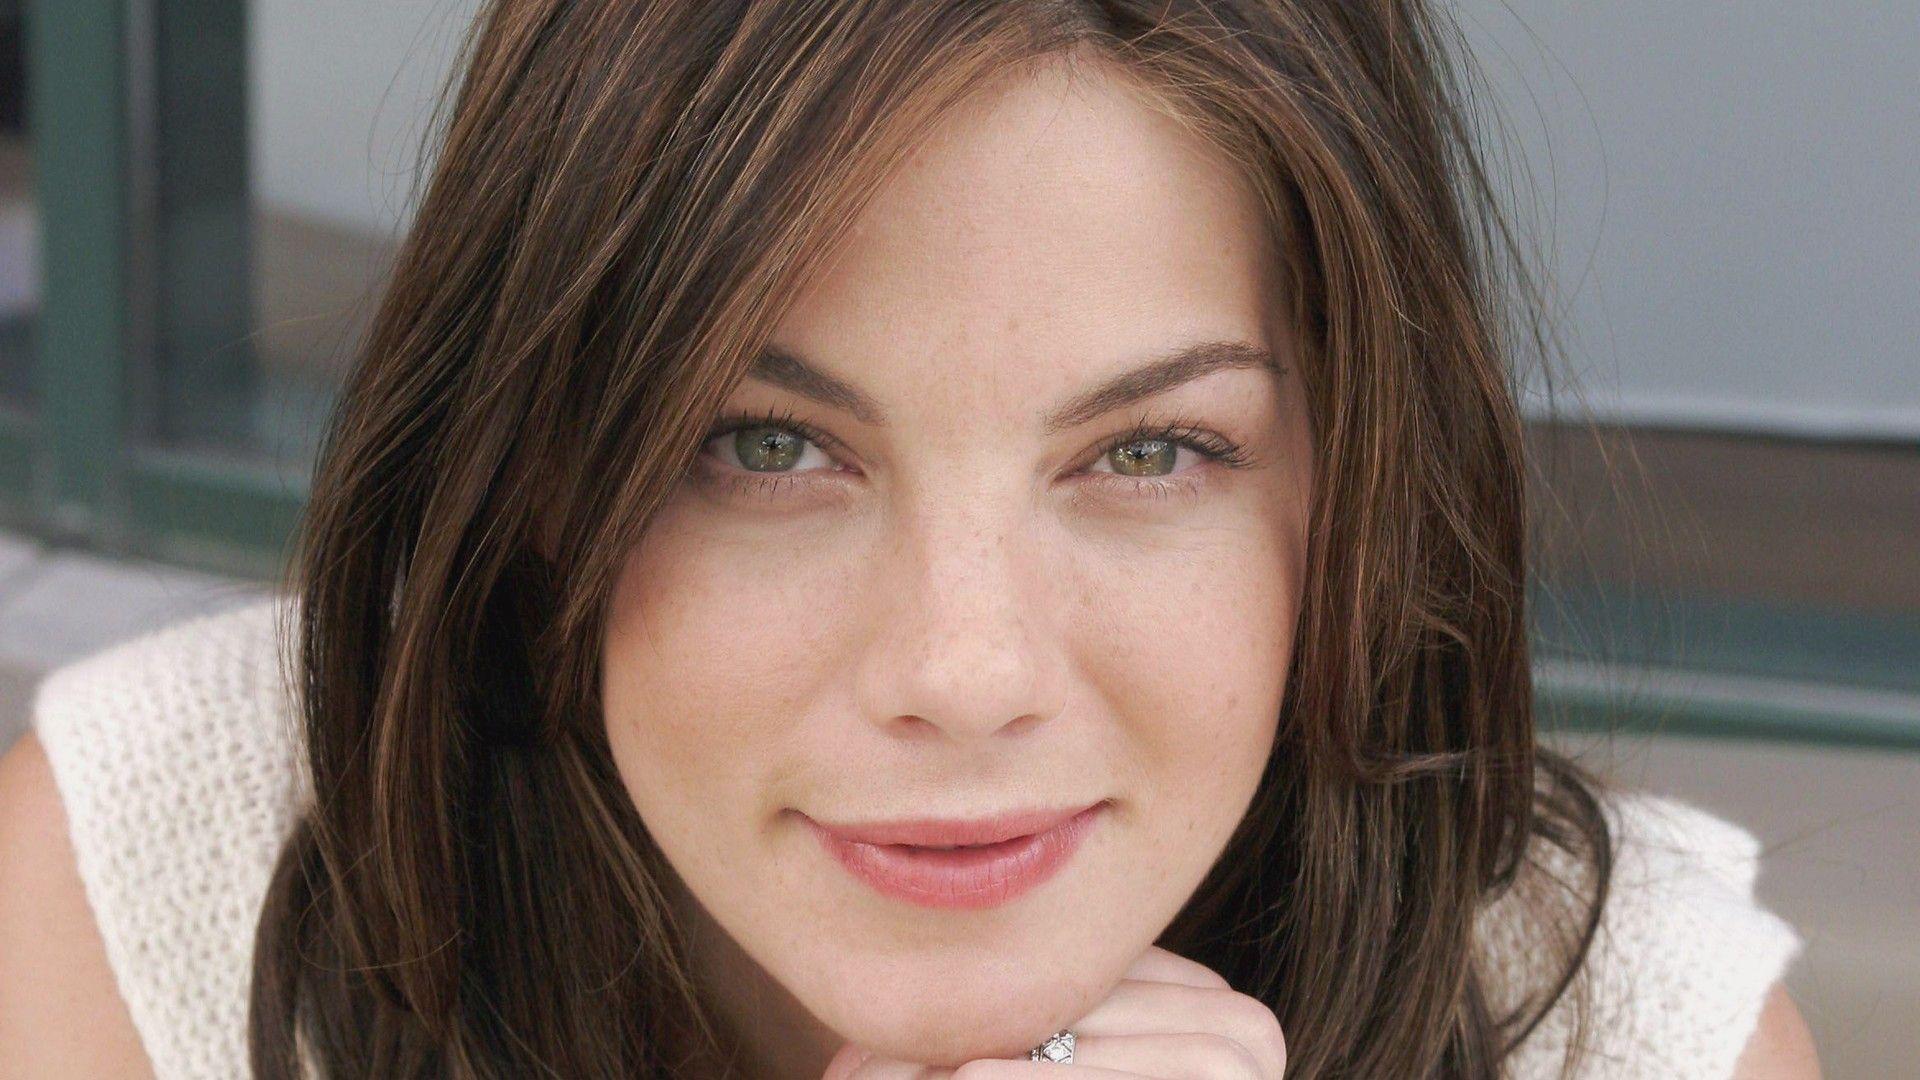 Michelle Monaghan Face Wallpaper 53583 1920x1080 px